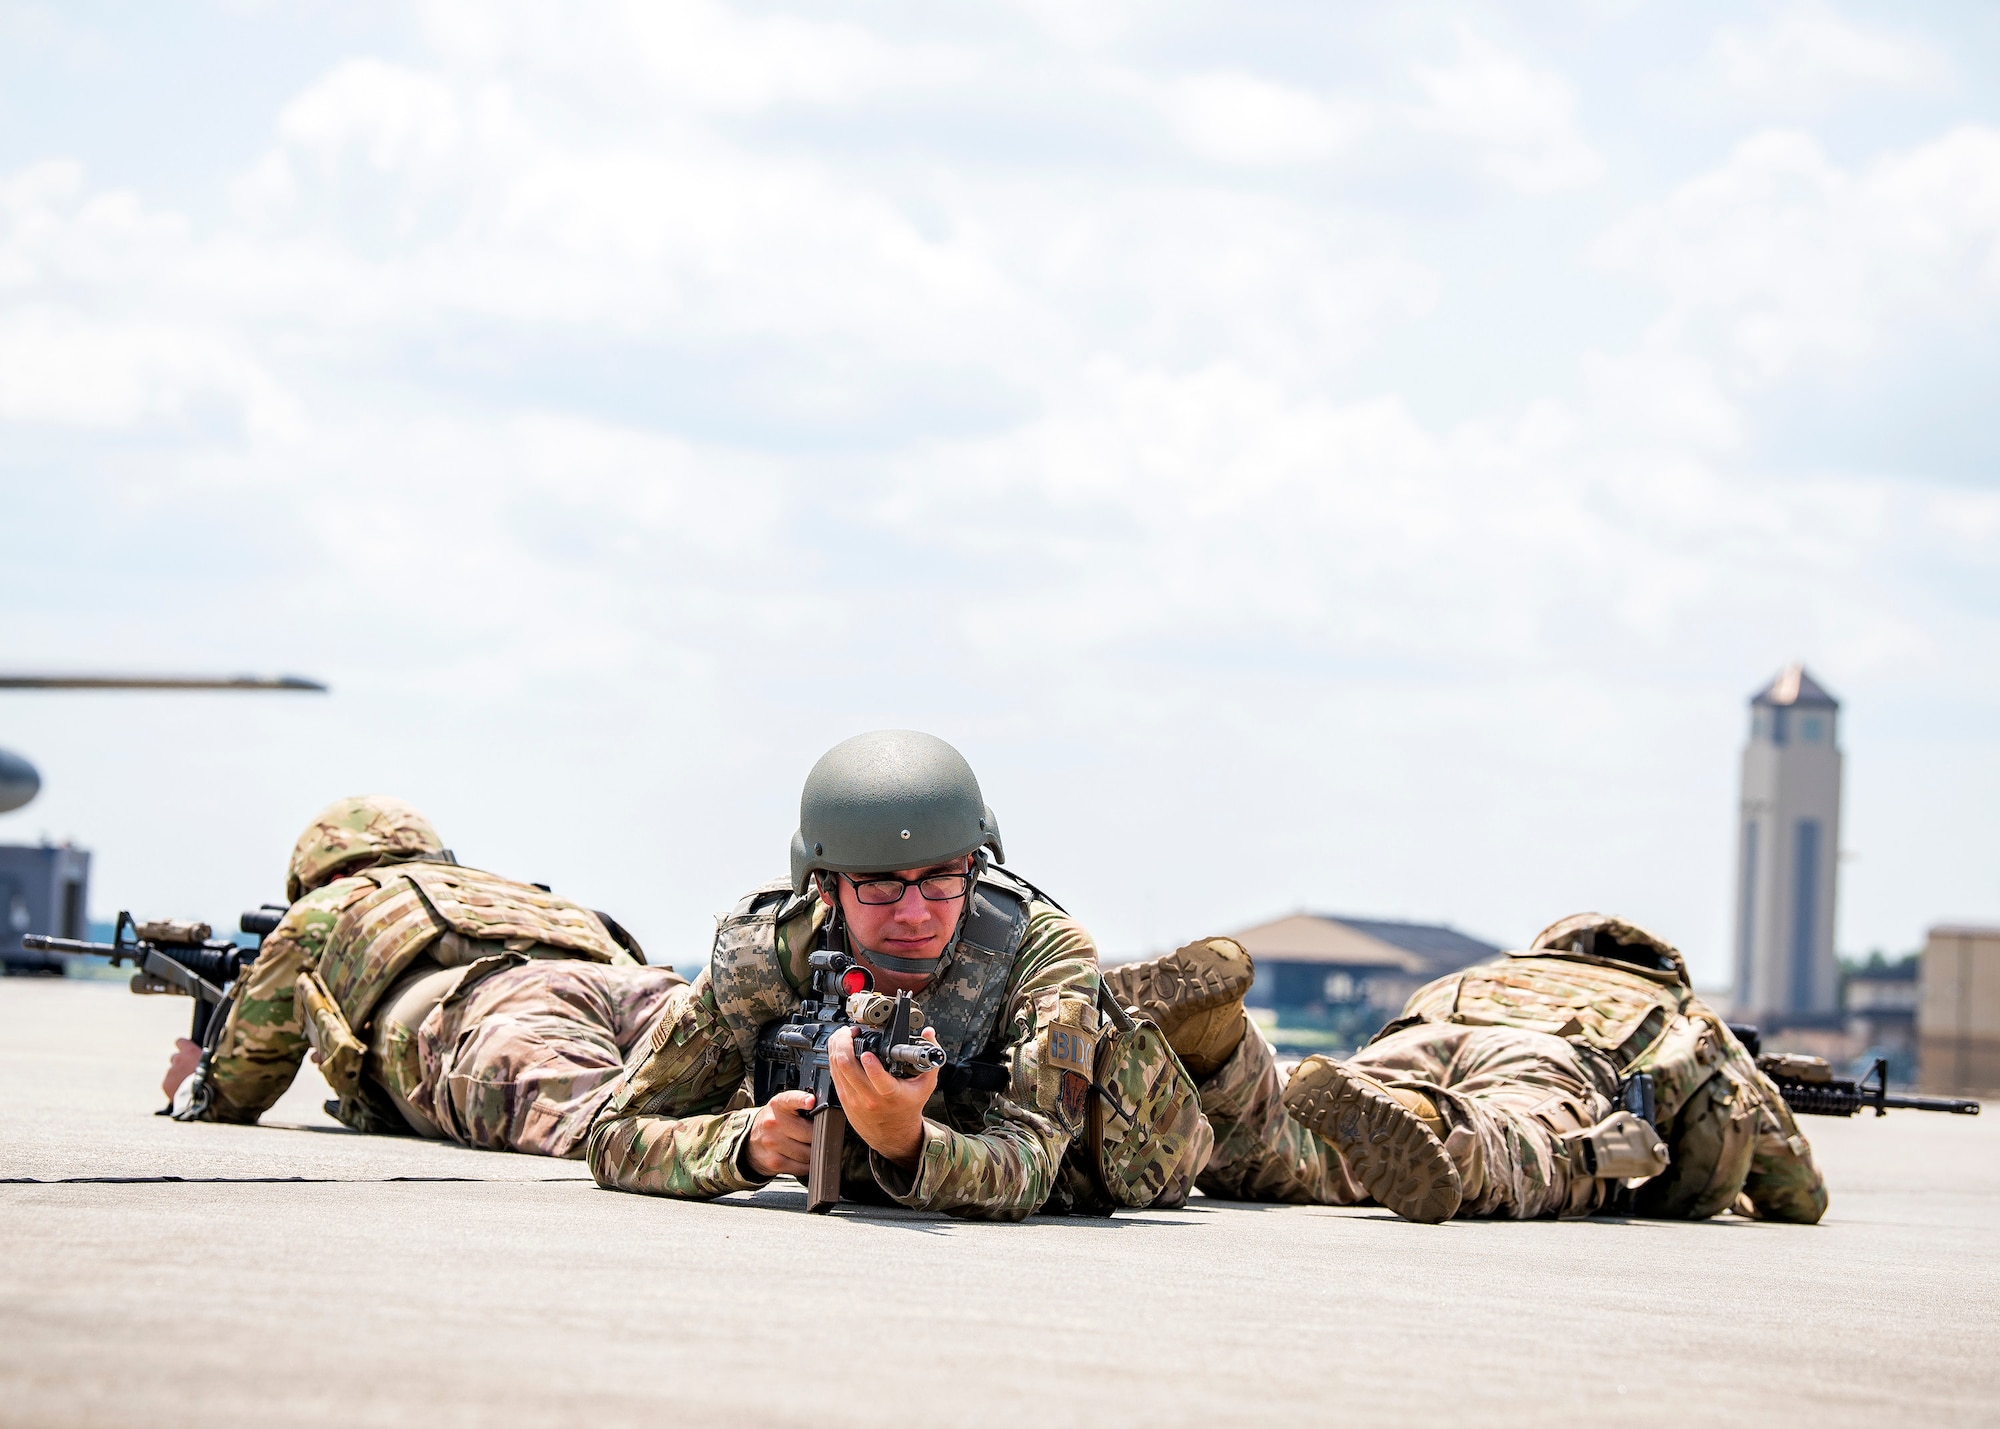 Airmen from the 820th Base Defense Group (BDG), hold their position during a tactical demonstration, Aug. 9, 2019, at Moody Air Force Base, Ga. Airmen from the 820th Base Defense Group did the tactical demo for Maj. Gen. Chad Franks, 9th Air Force commander. Franks has served on separate occasions as the commander for the 23d Wing and 347th Rescue Group and is a command pilot with more than 3,300 hours in multiple aircraft including HC-130J Combat King II and HH-60G Pave Hawk. (U.S. Air Force photo by Airman 1st Class Eugene Oliver)